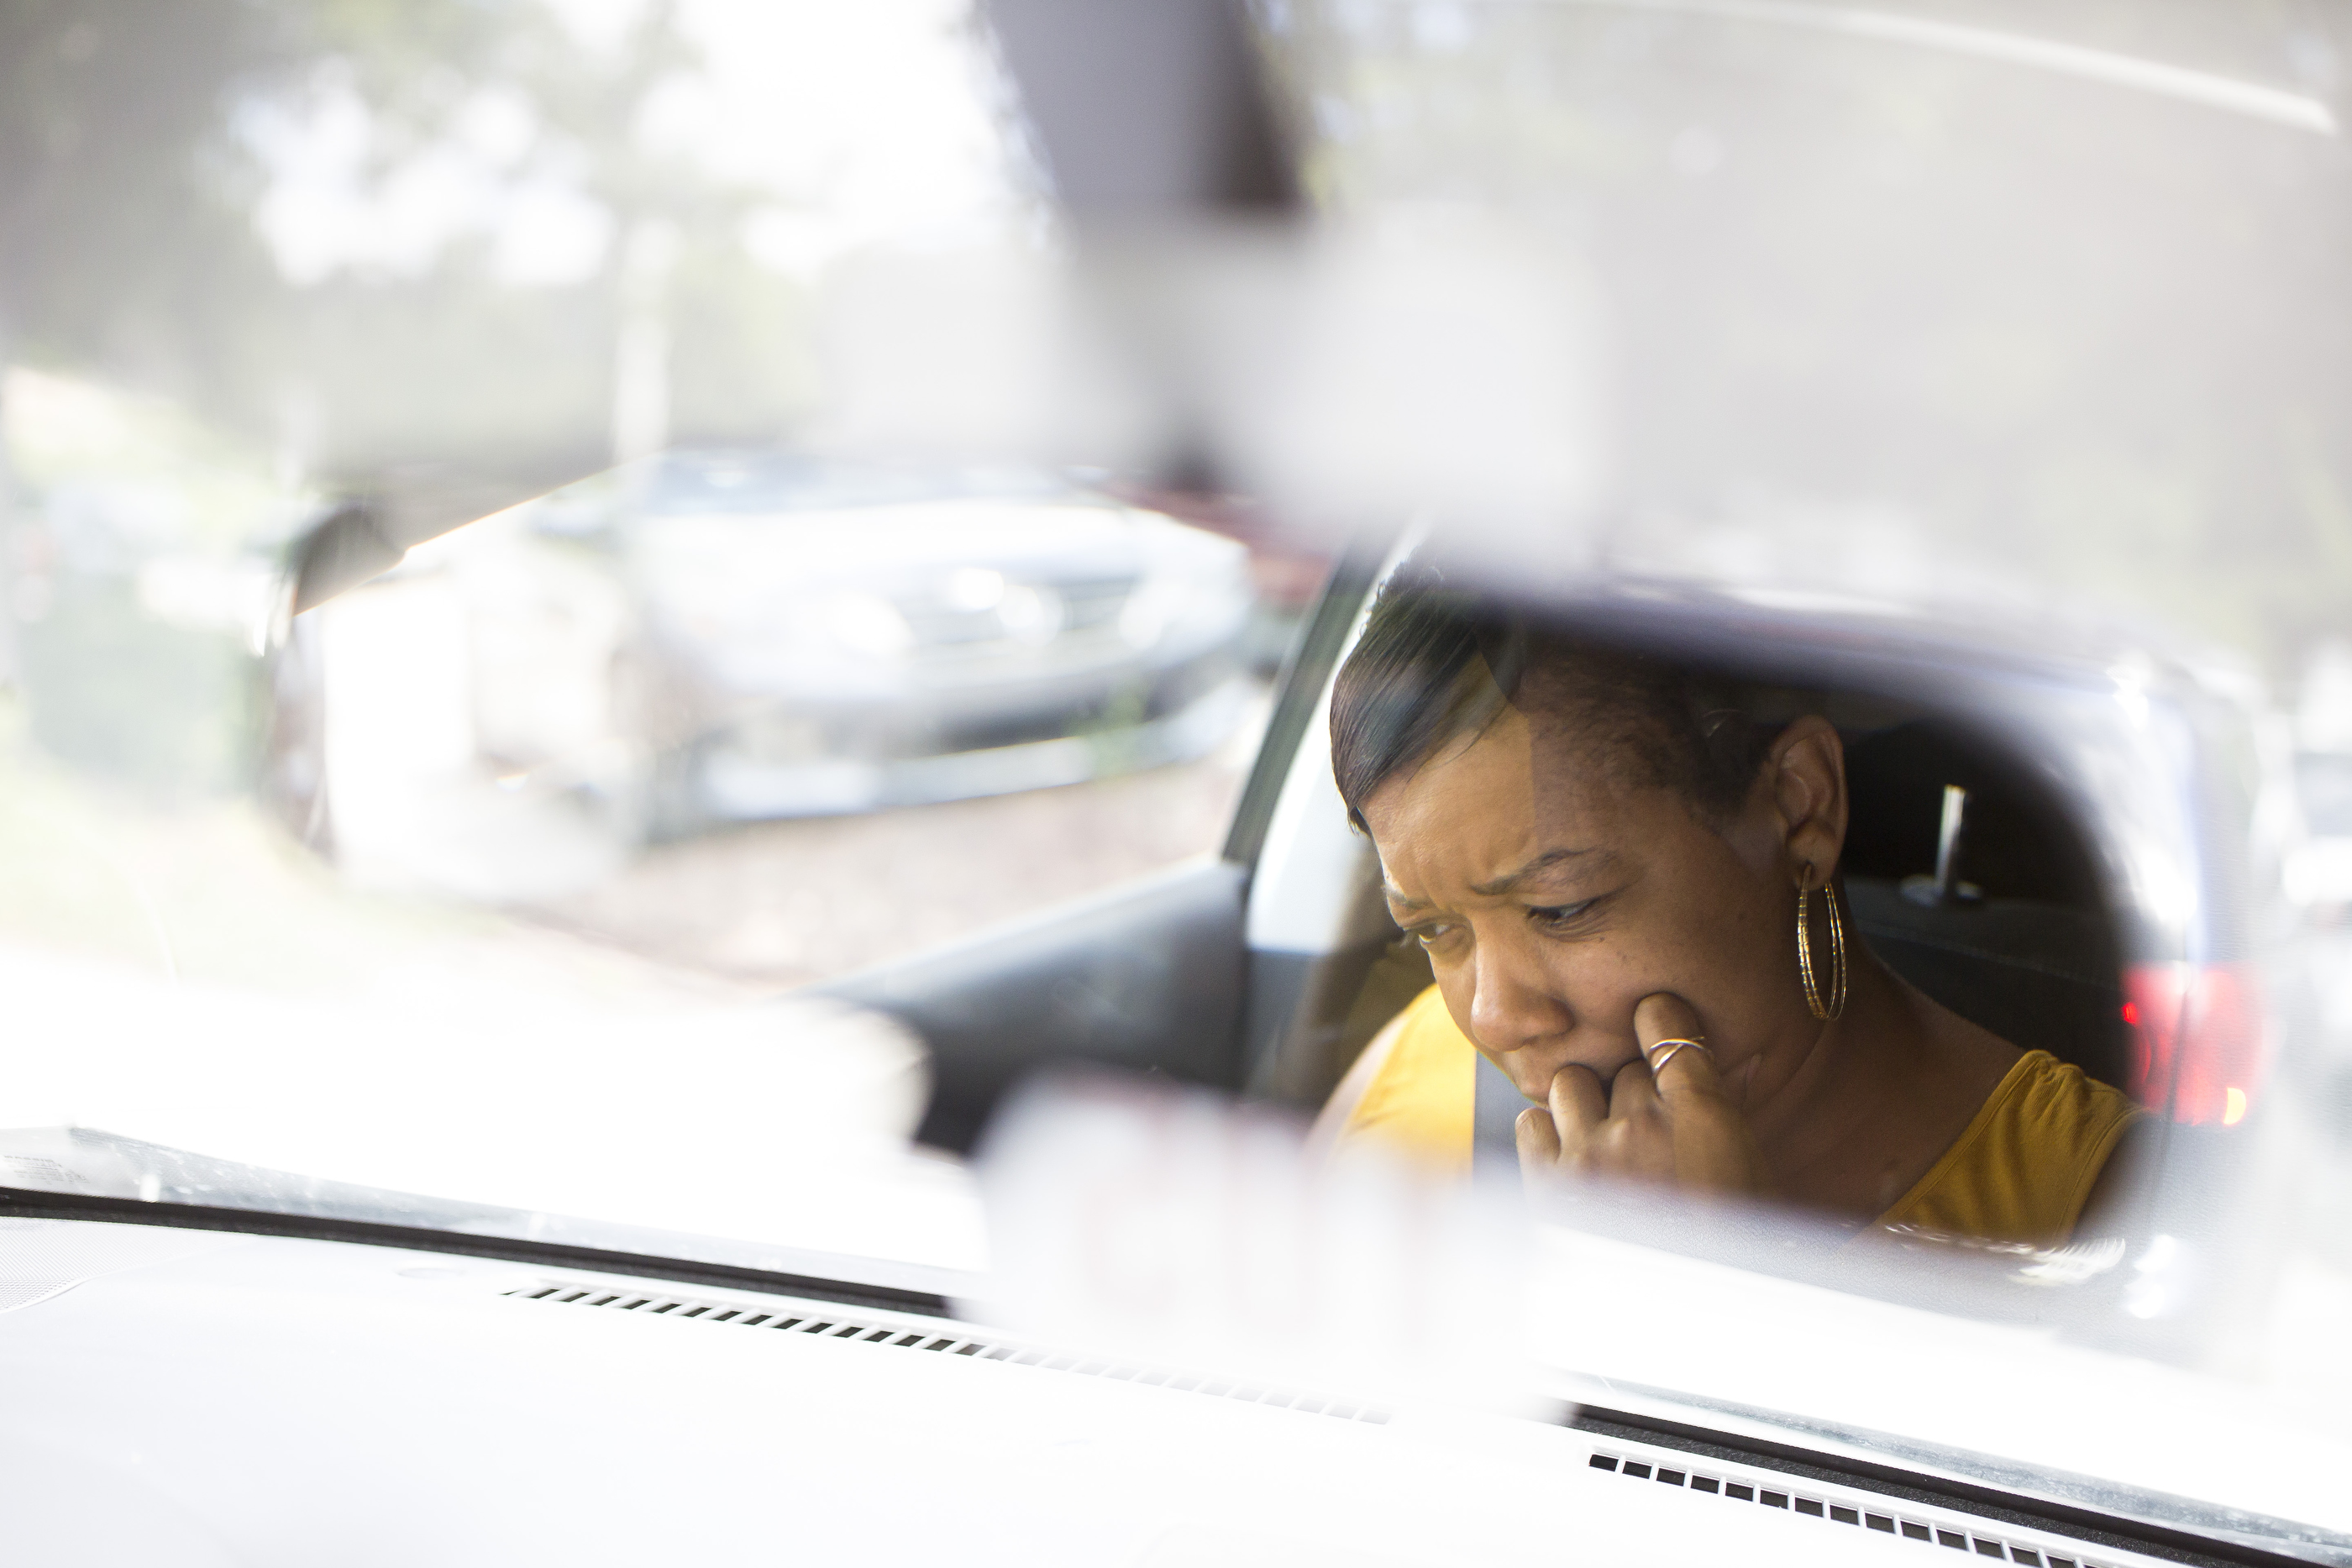 Ayeisha Owens waits in the carpool line to pick up her daughter Karisma, 9, on her last day of school on Friday, June 8, 2018. “I felt anxious,” she said. “Only because I didn’t know what they would be doing.”